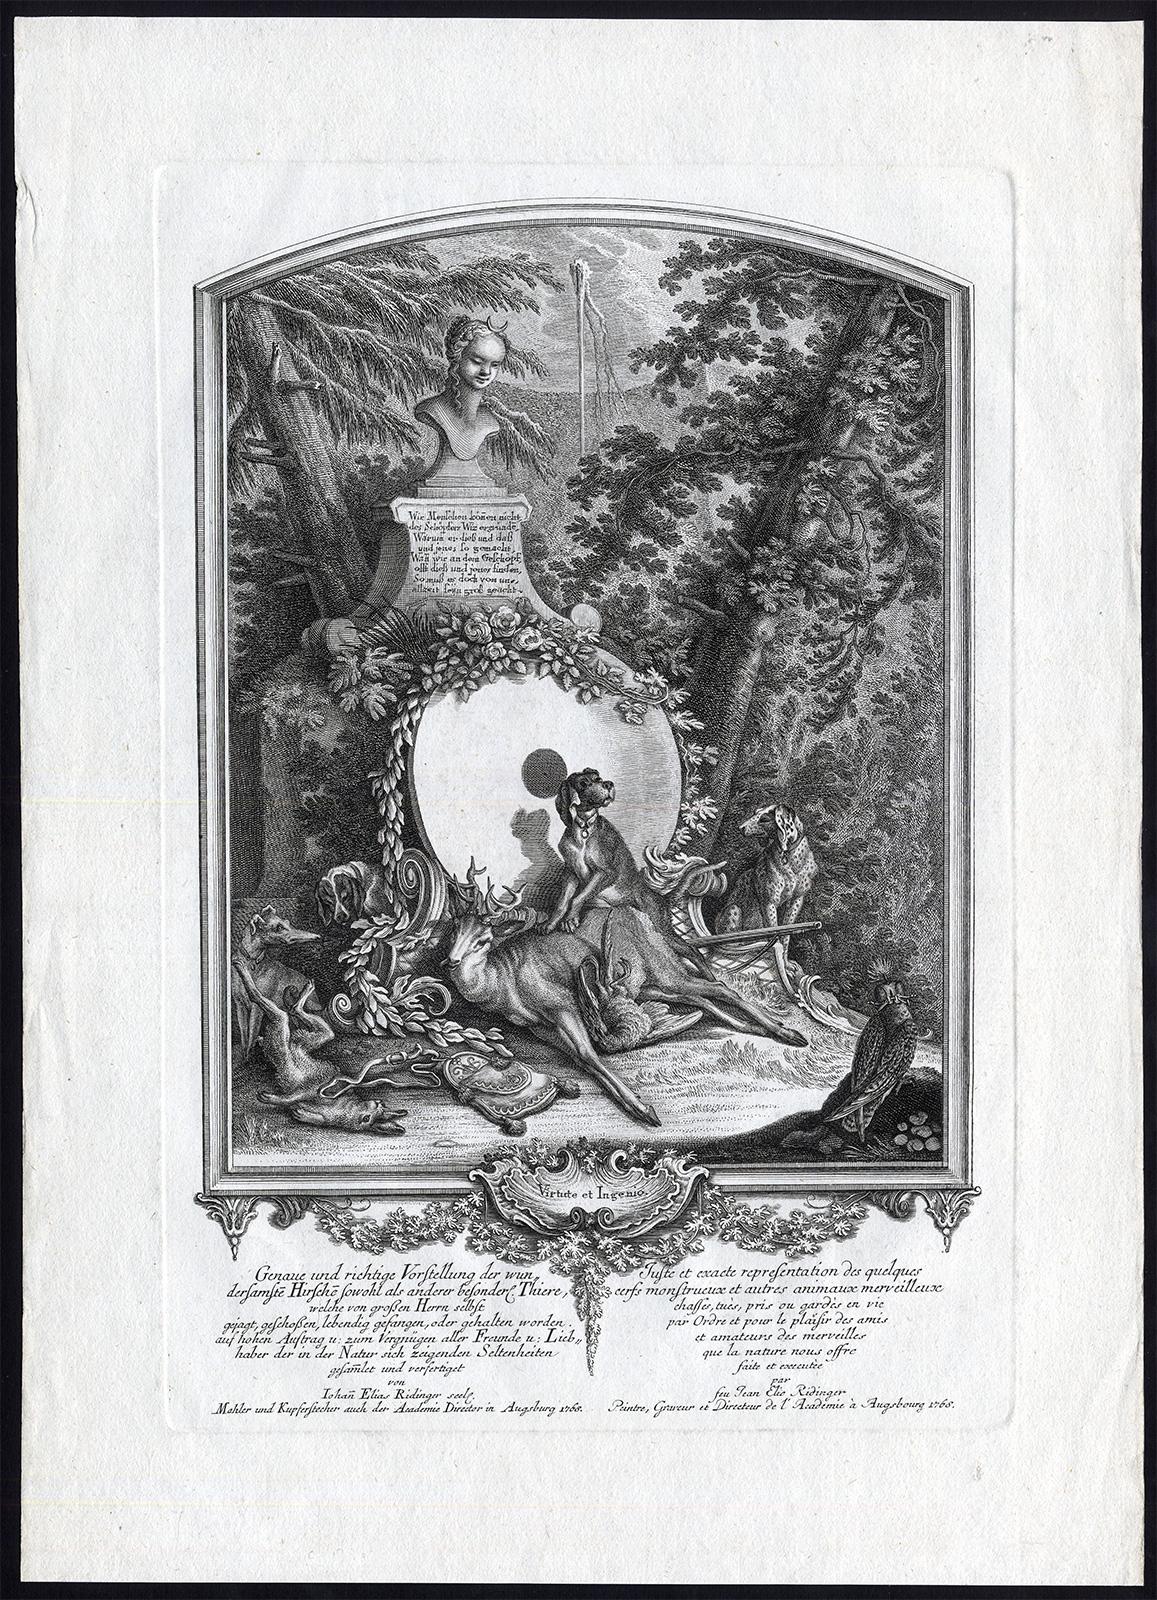 Antique print showing Selene and a hunting dog by Ridinger - Engraving - 18th c - Print by Martin Elias Ridinger